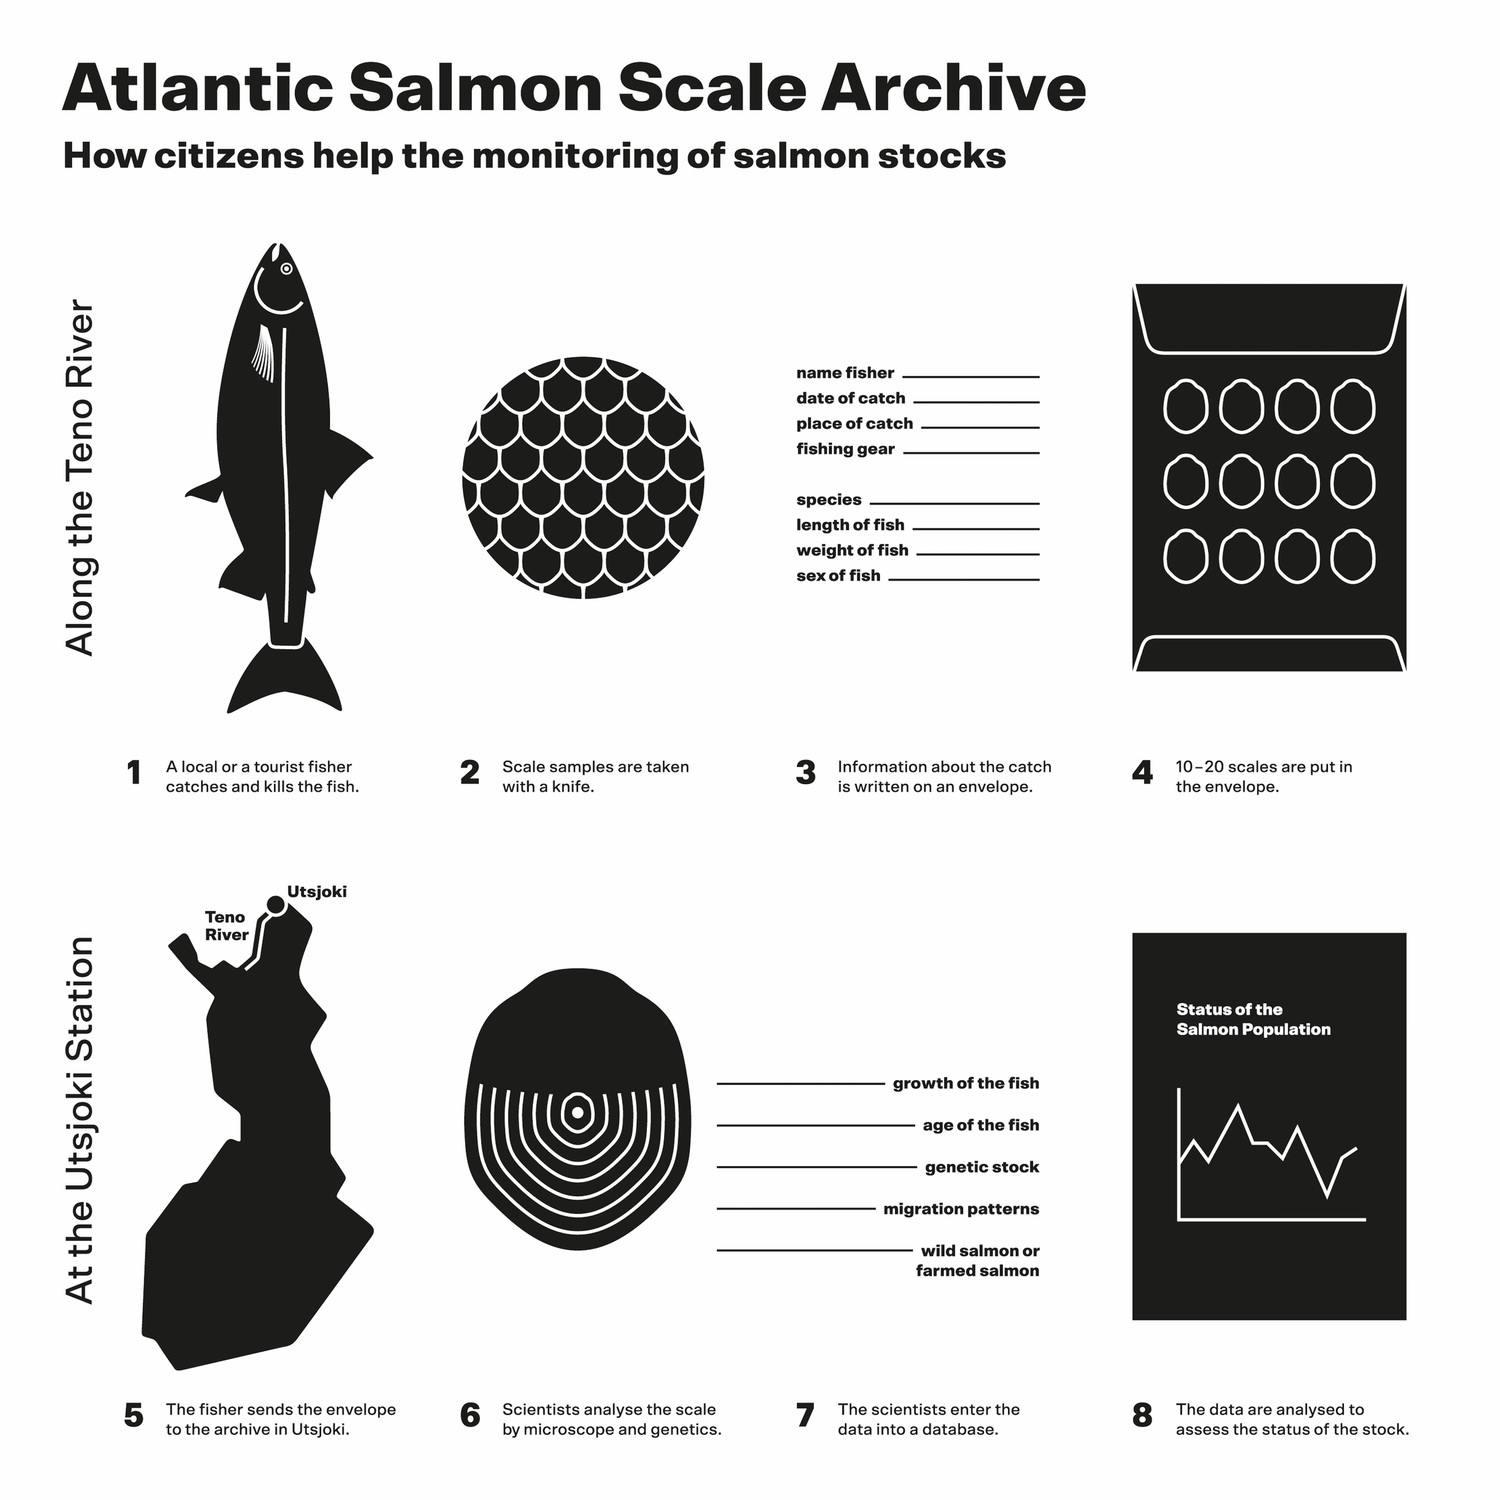 Natural Resources Institute Finland: The Atlantic Salmon Scale Archive. © Aalto University/illustration by Adina Renner and Qin Yang